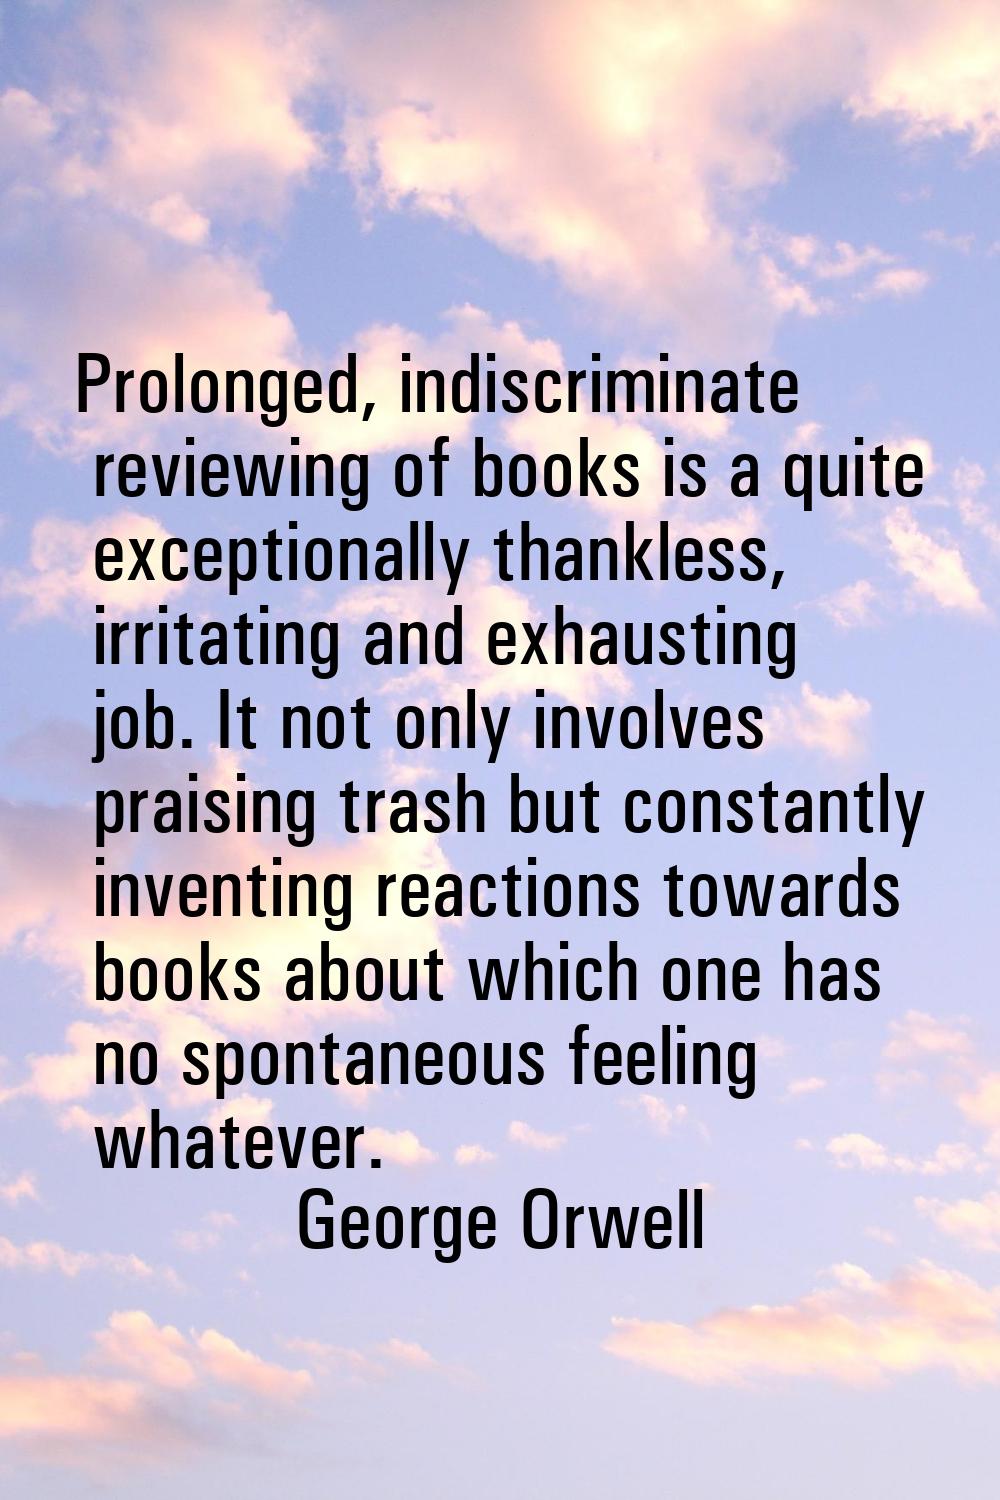 Prolonged, indiscriminate reviewing of books is a quite exceptionally thankless, irritating and exh